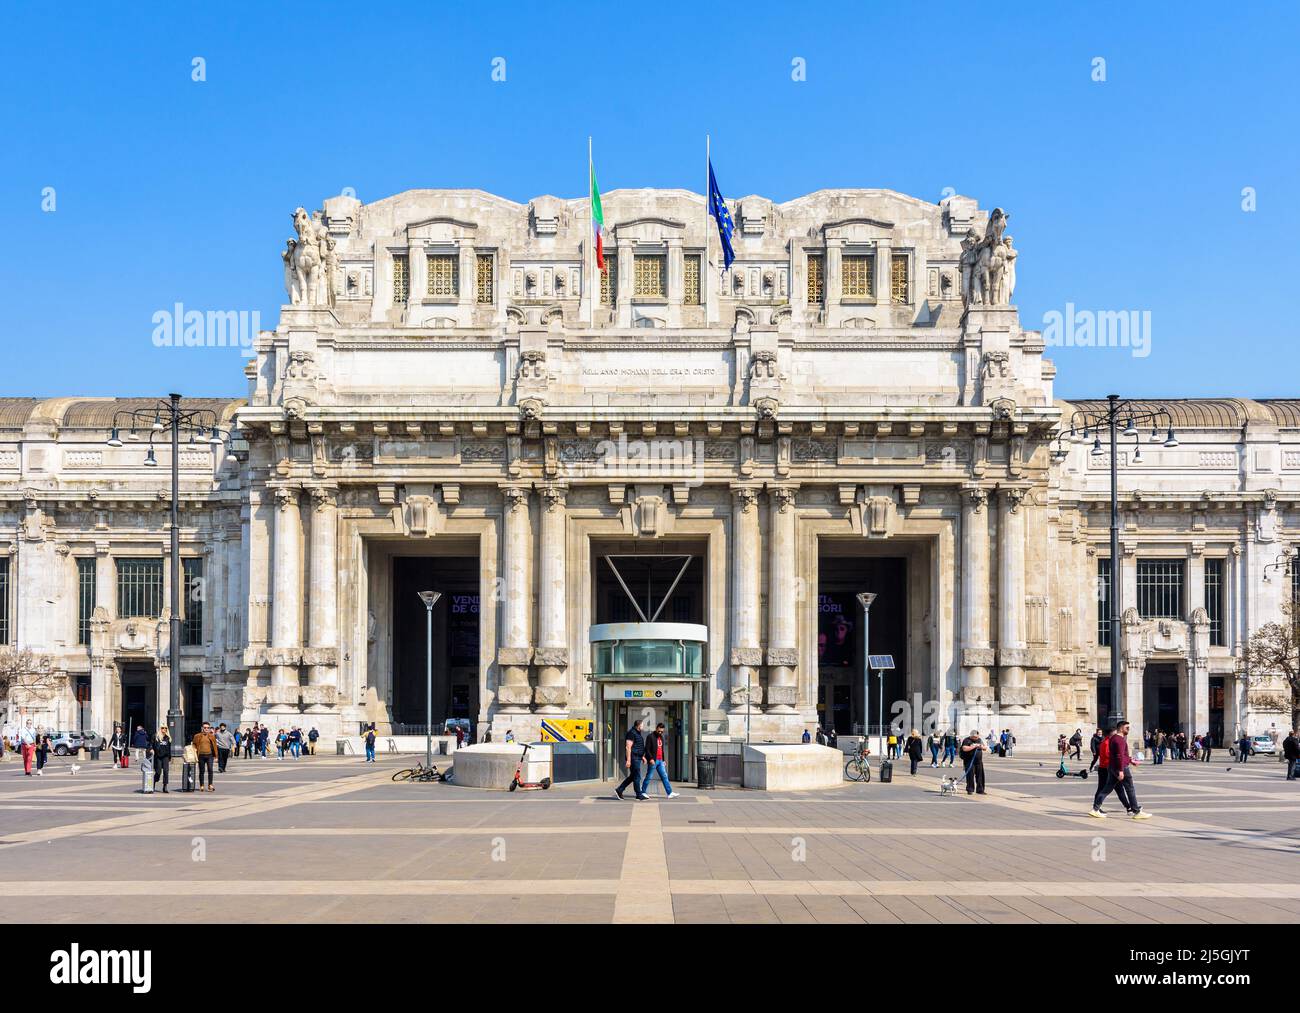 Front view of the monumental entrance portico of Milano Centrale train station in Milan, Italy. Stock Photo